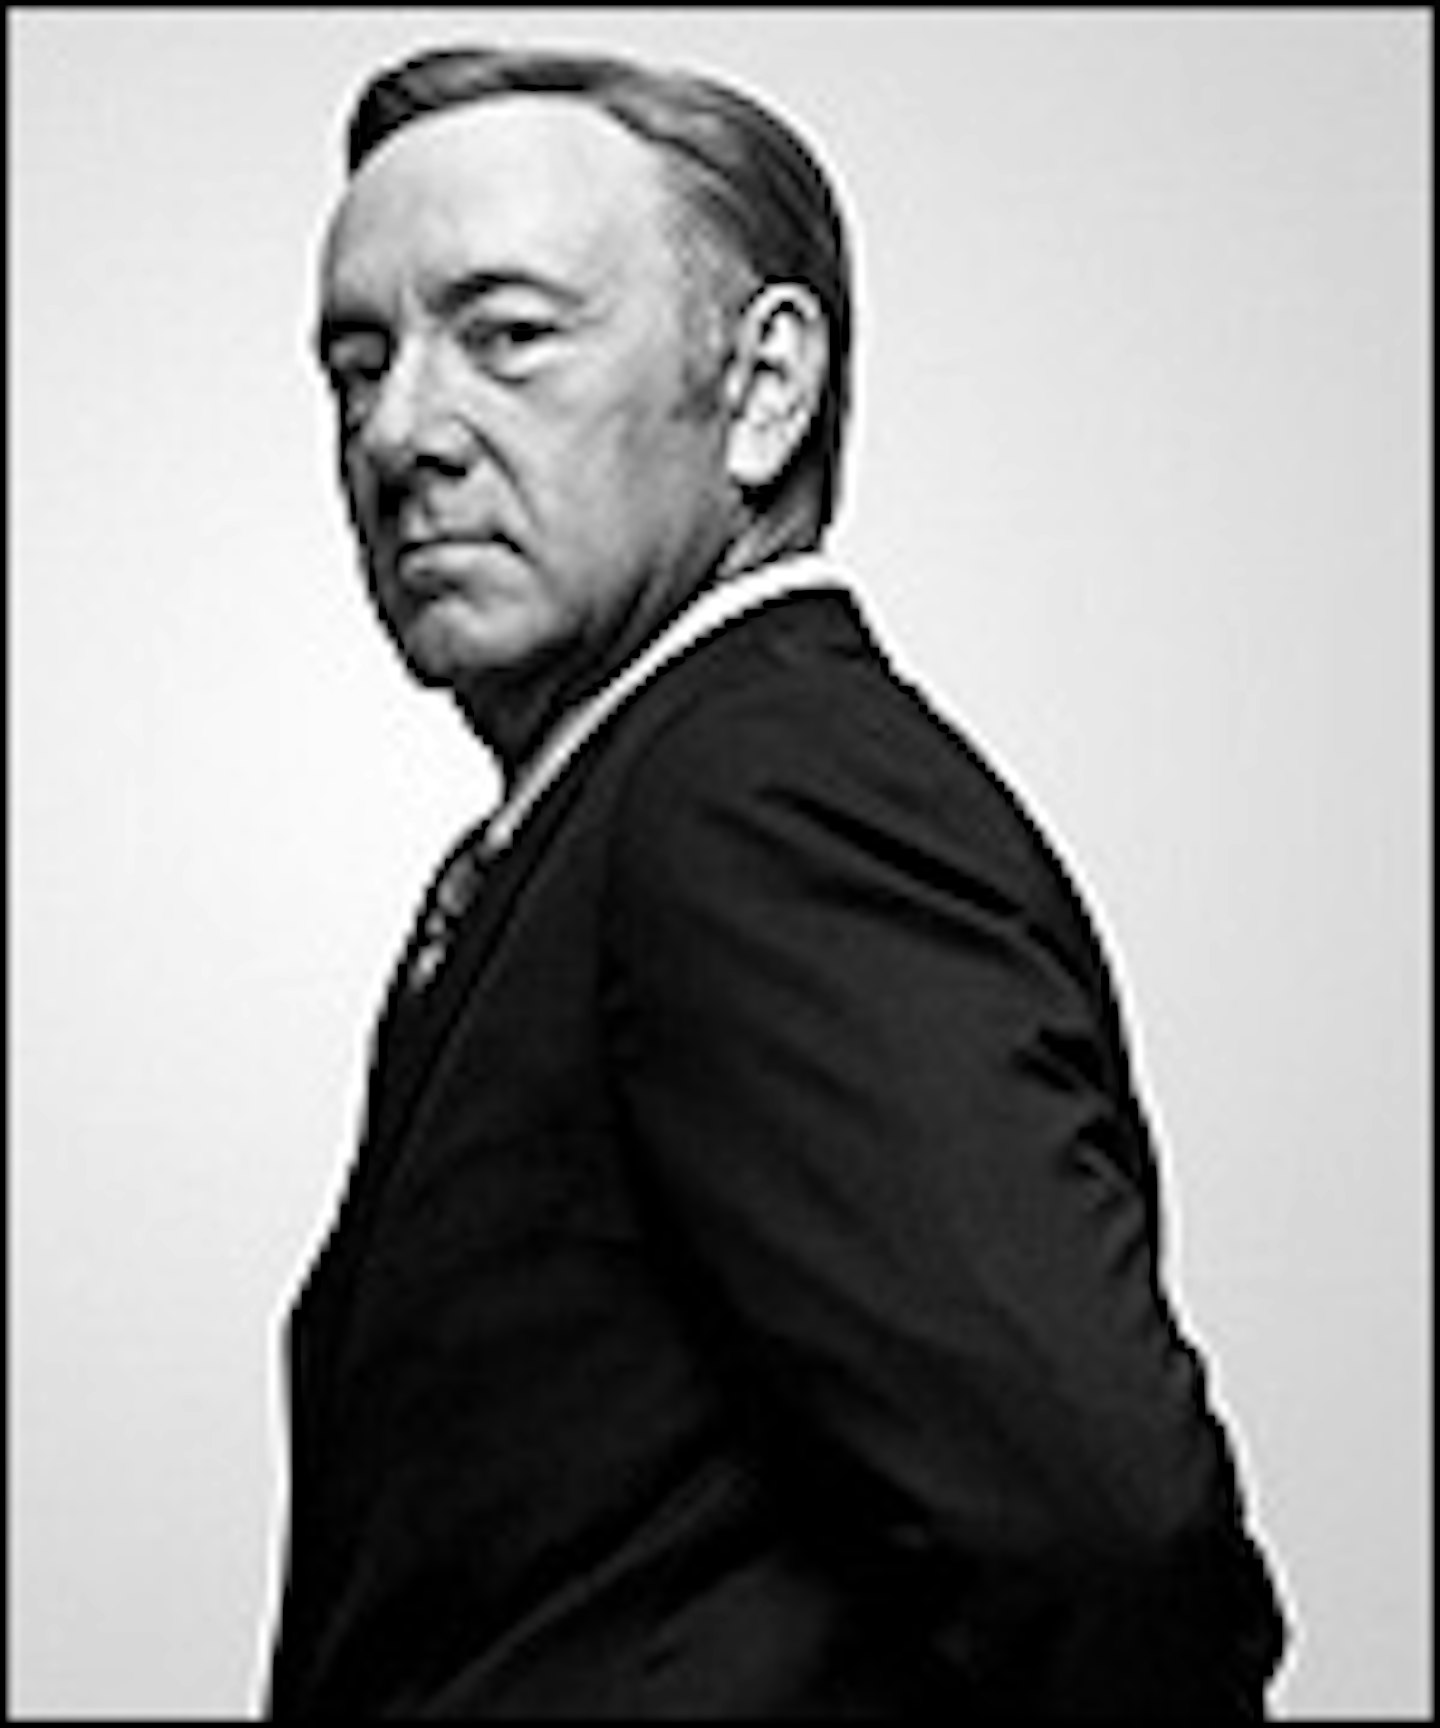 Trailer For House Of Cards Season 2